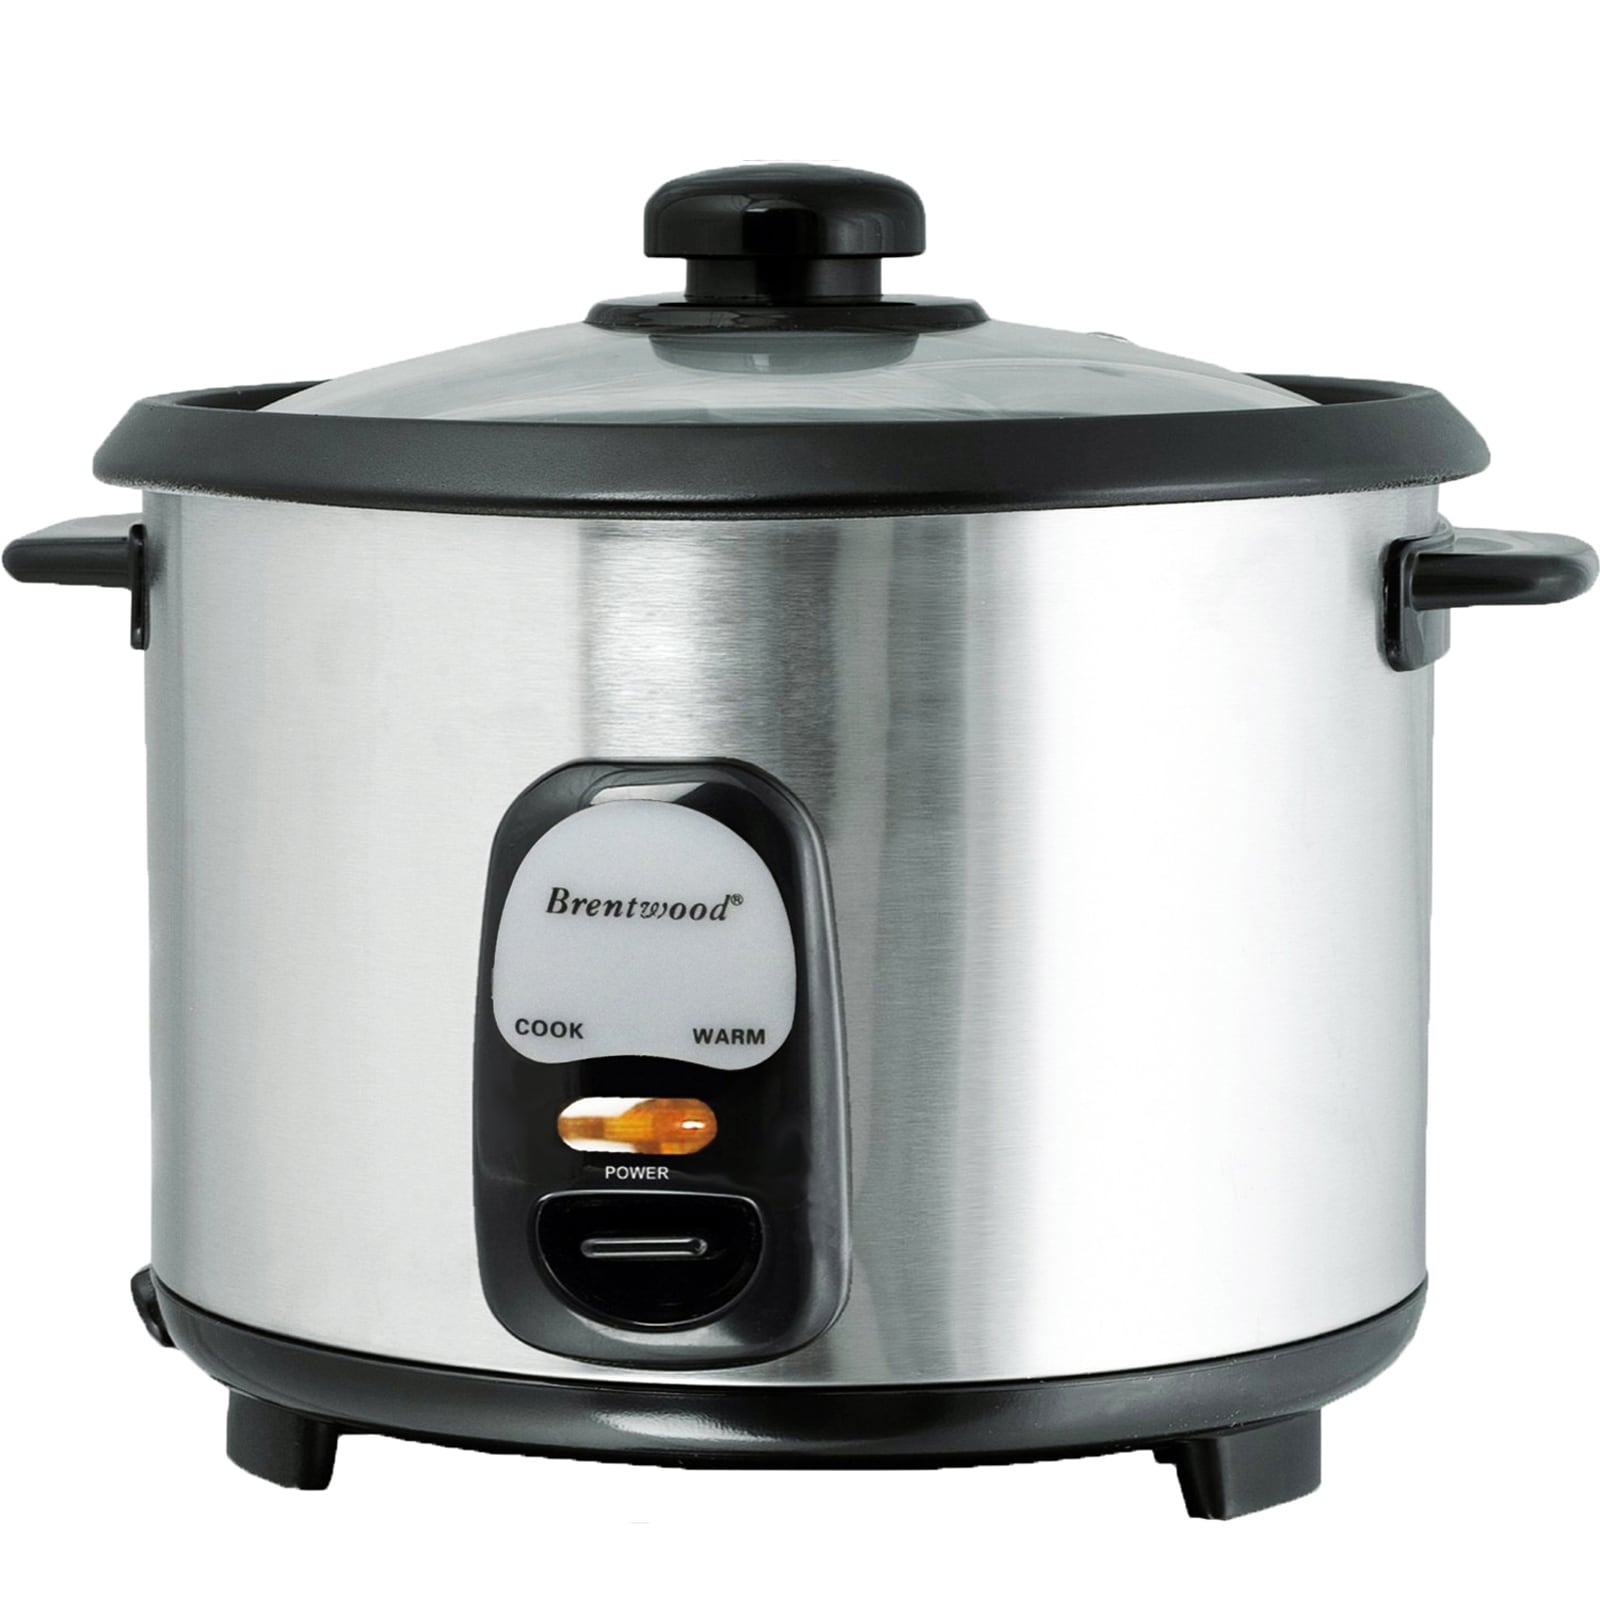 10 Cup Rice Cooker/Non-Stick - N/A - Bed Bath & Beyond - 33418907